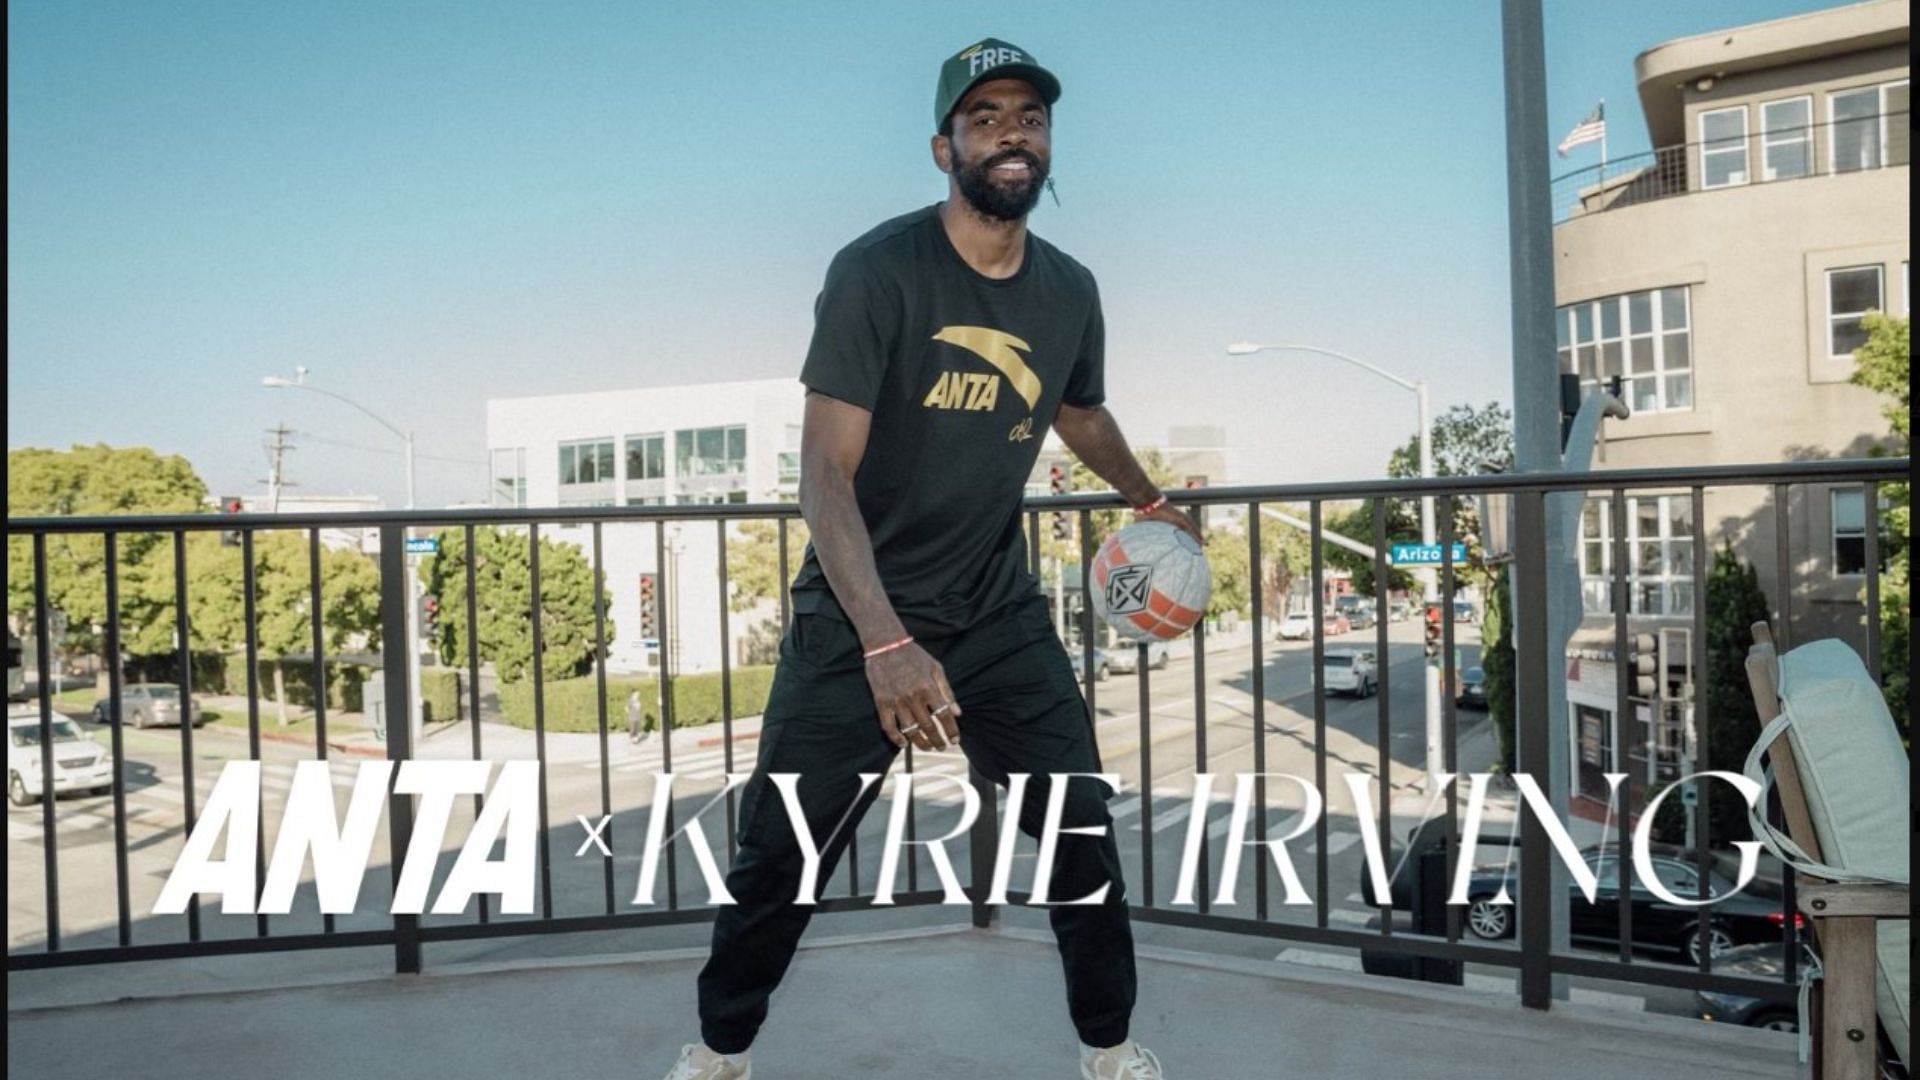 Kyrie Irving is now an Anta endorser.